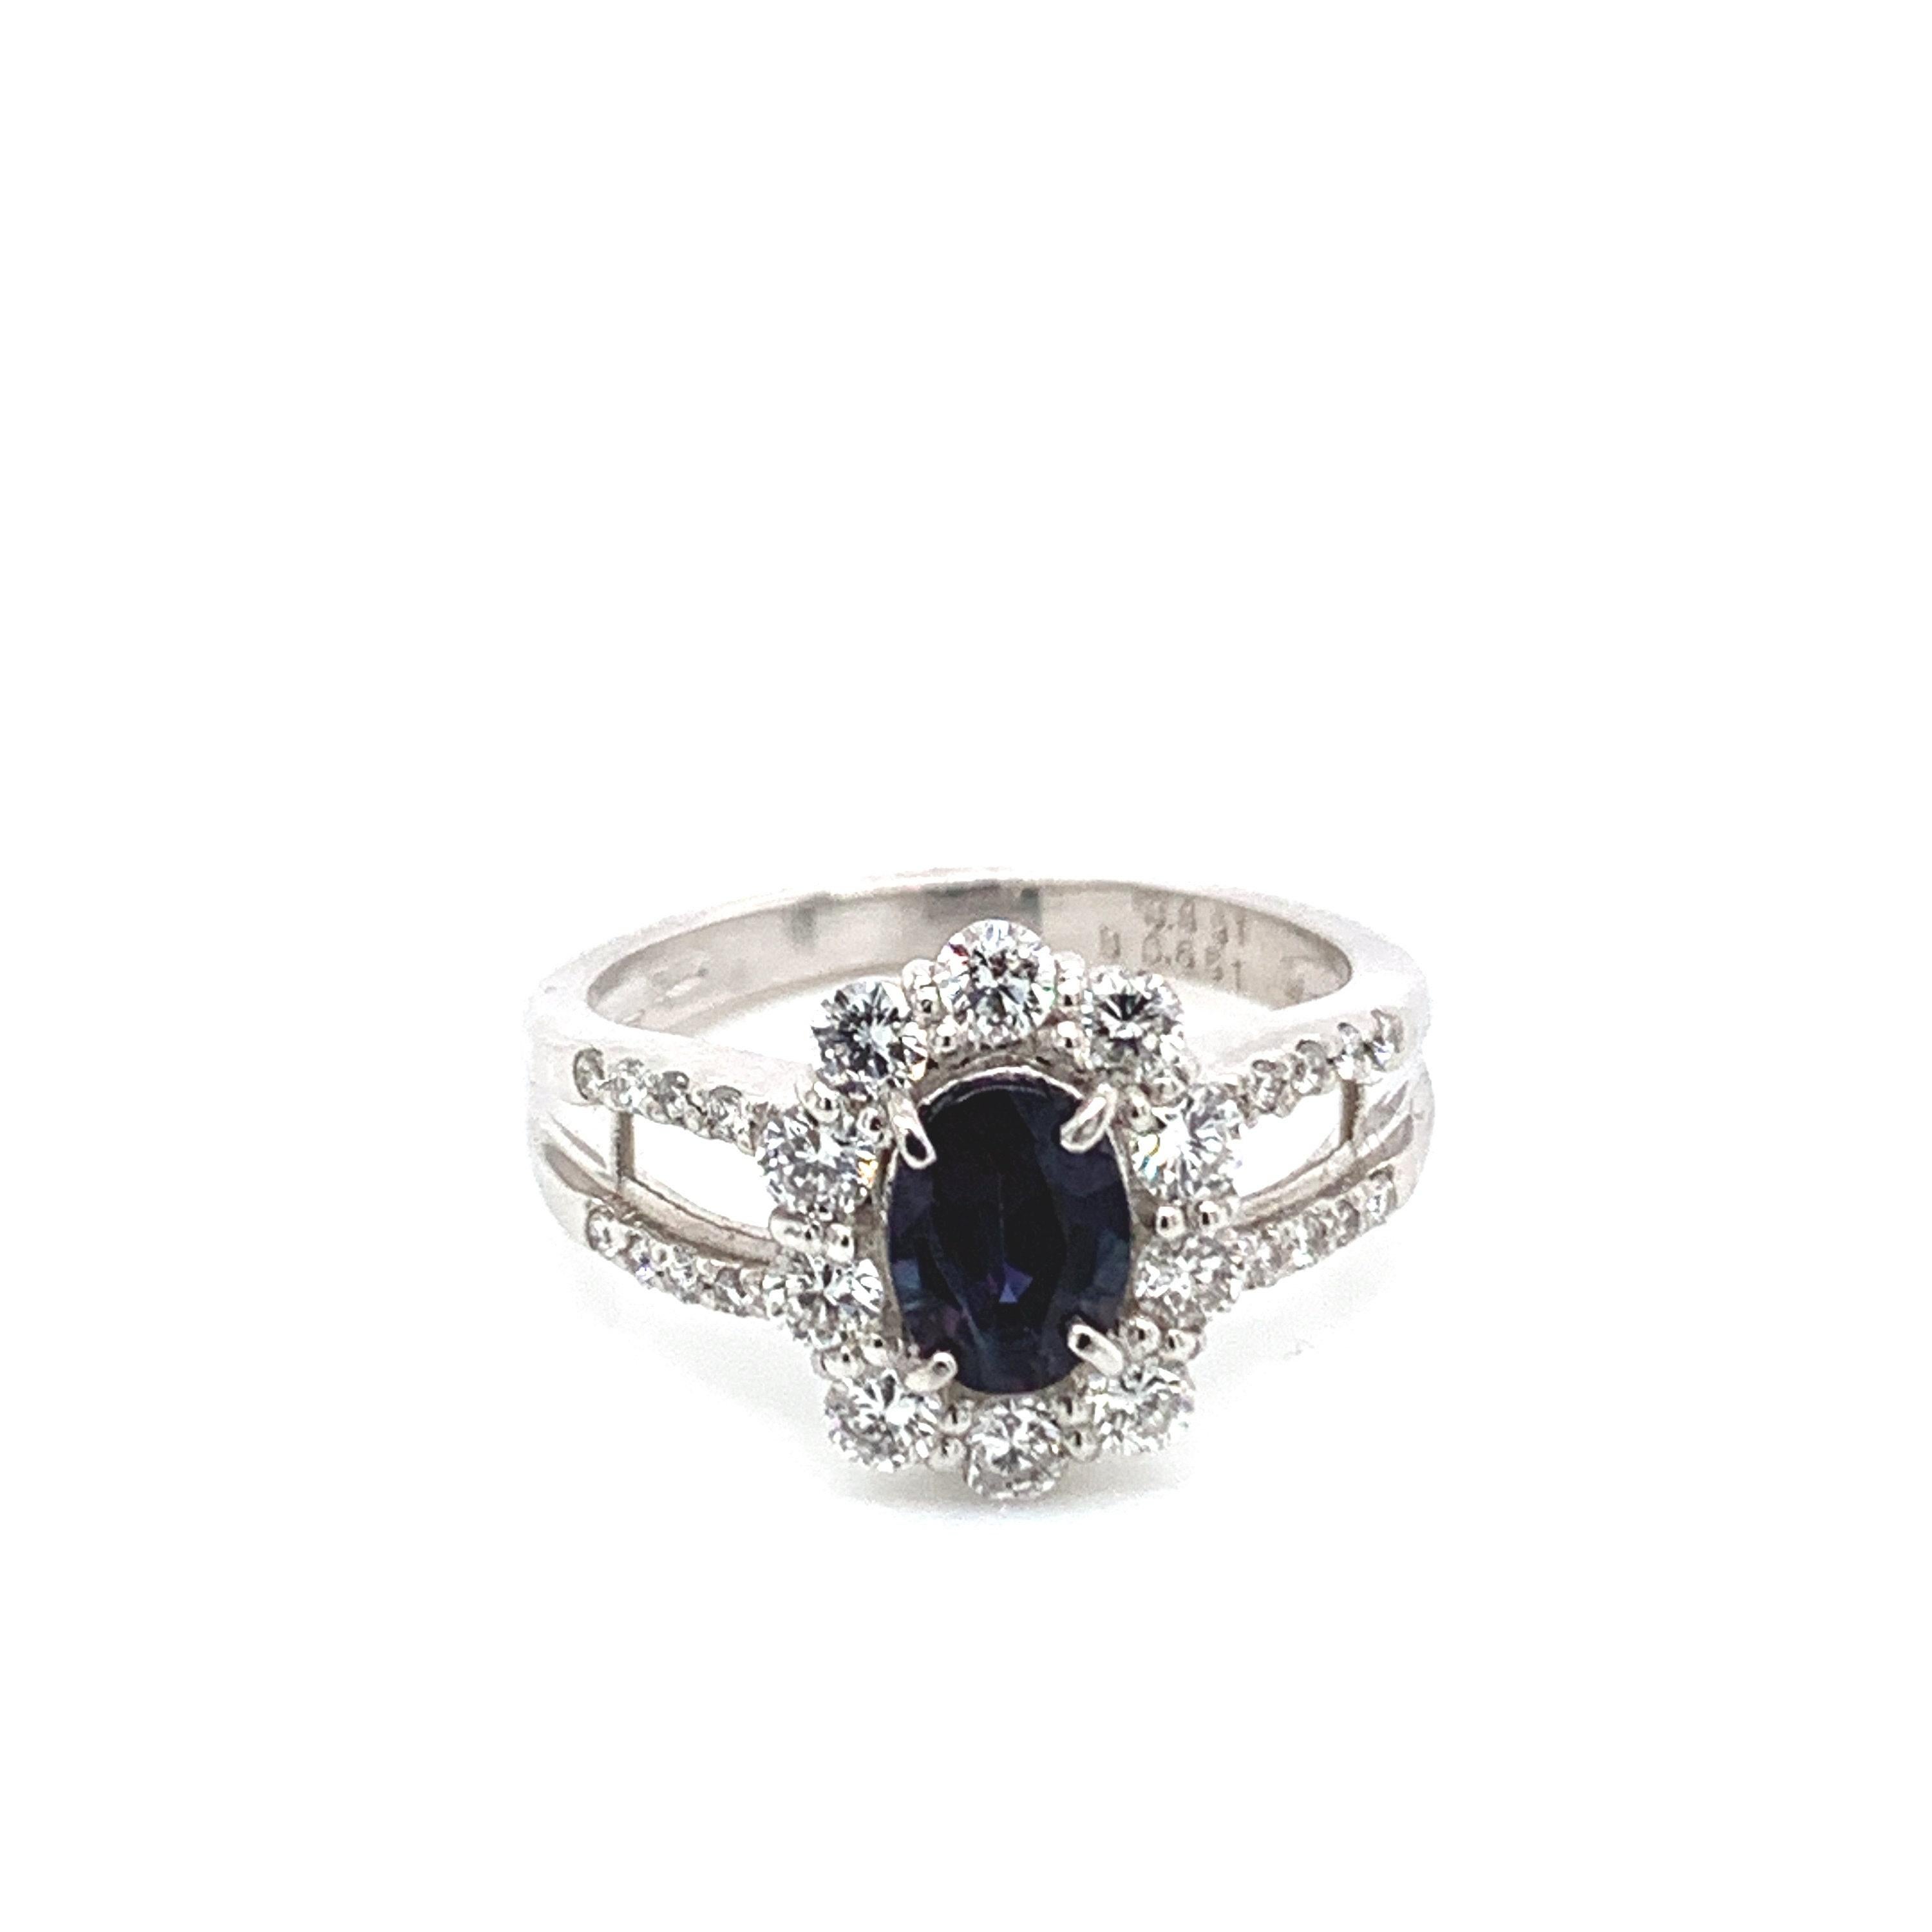 This is a gorgeous natural AAA quality oval Alexandrite surrounded by a dainty diamond halo that is set in a vintage platinum setting. This ring features a  natural 0.85 OVAL alexandrite that is certified by the Gemological Institute of America